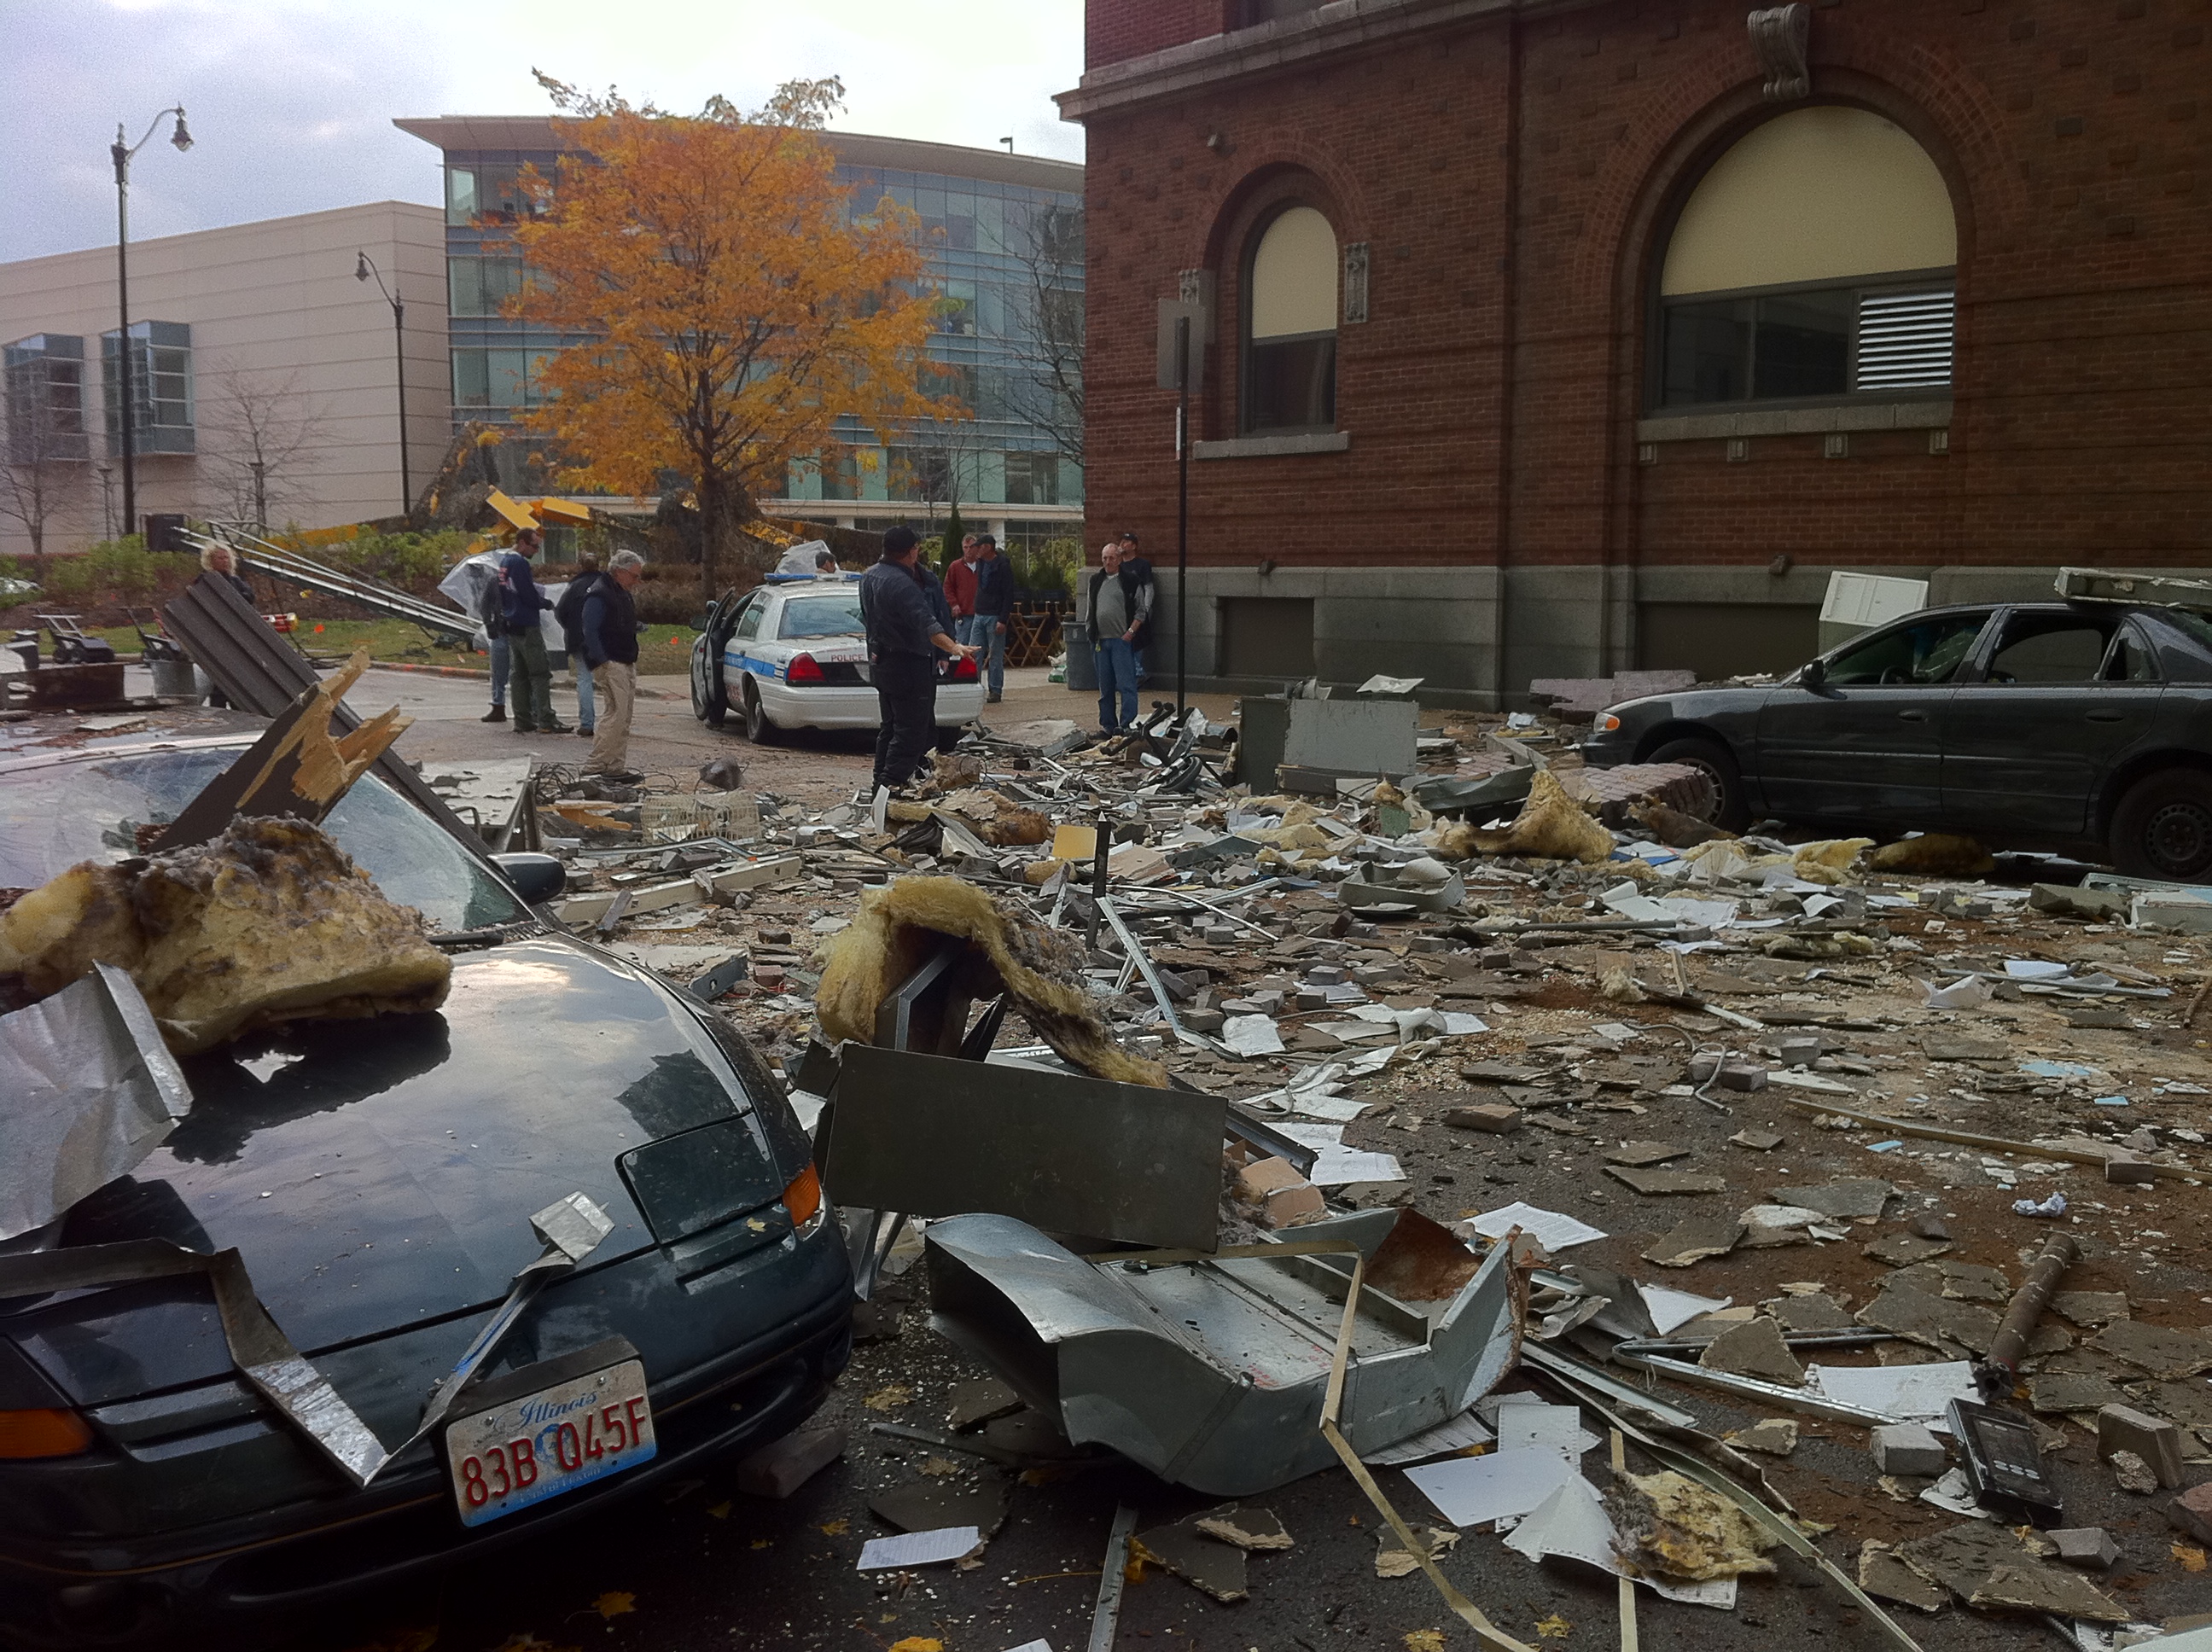 Chicago Code explosion aftermath